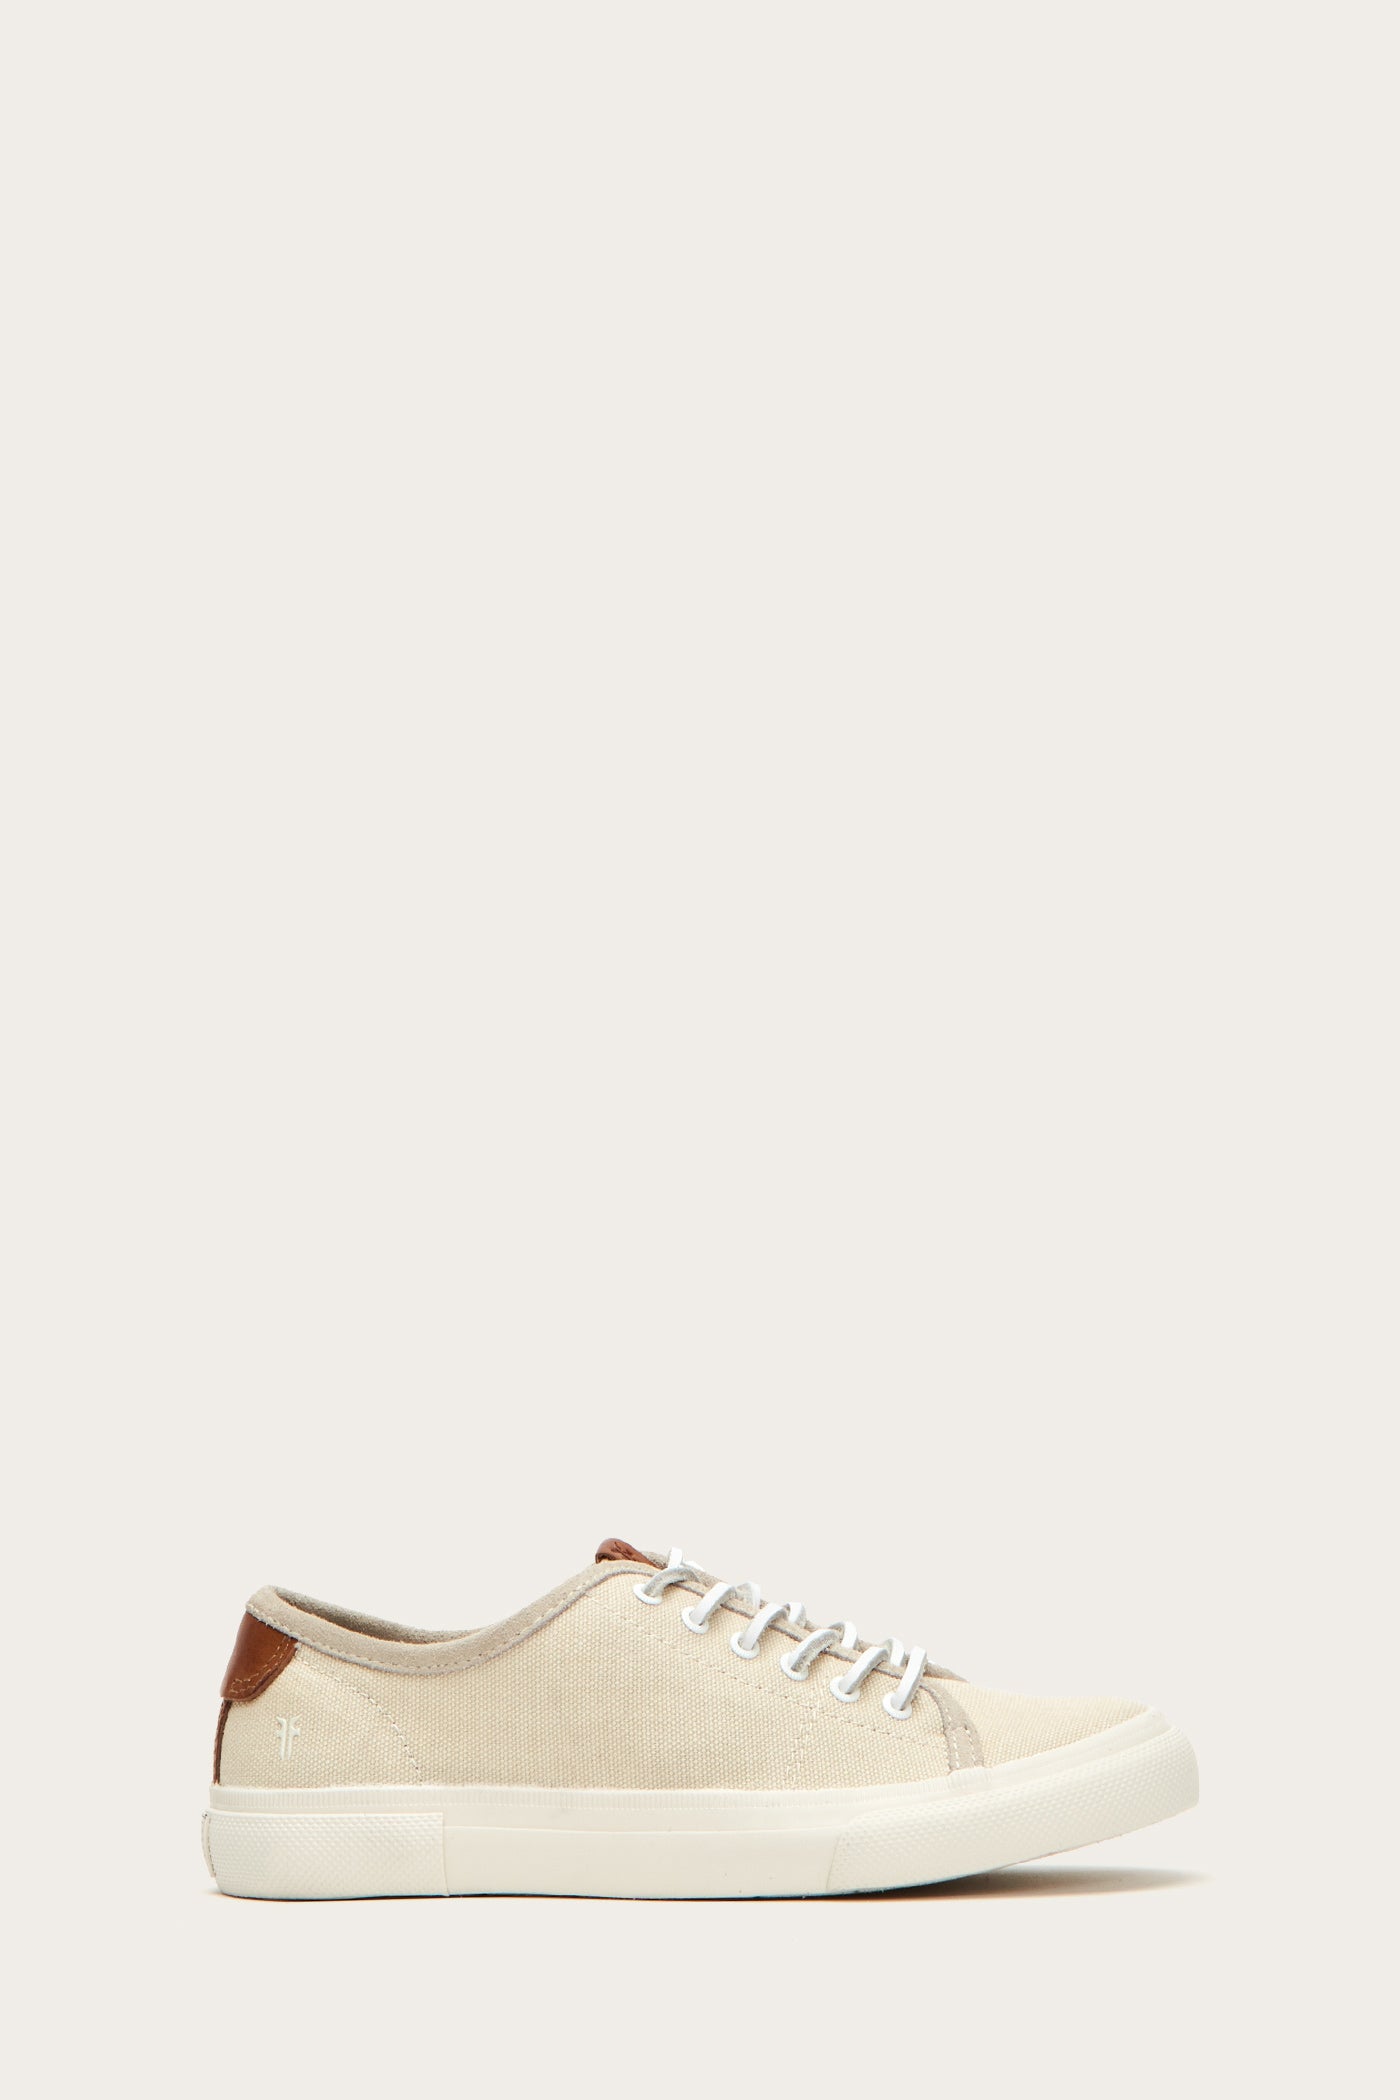 frye gia canvas low lace sneakers